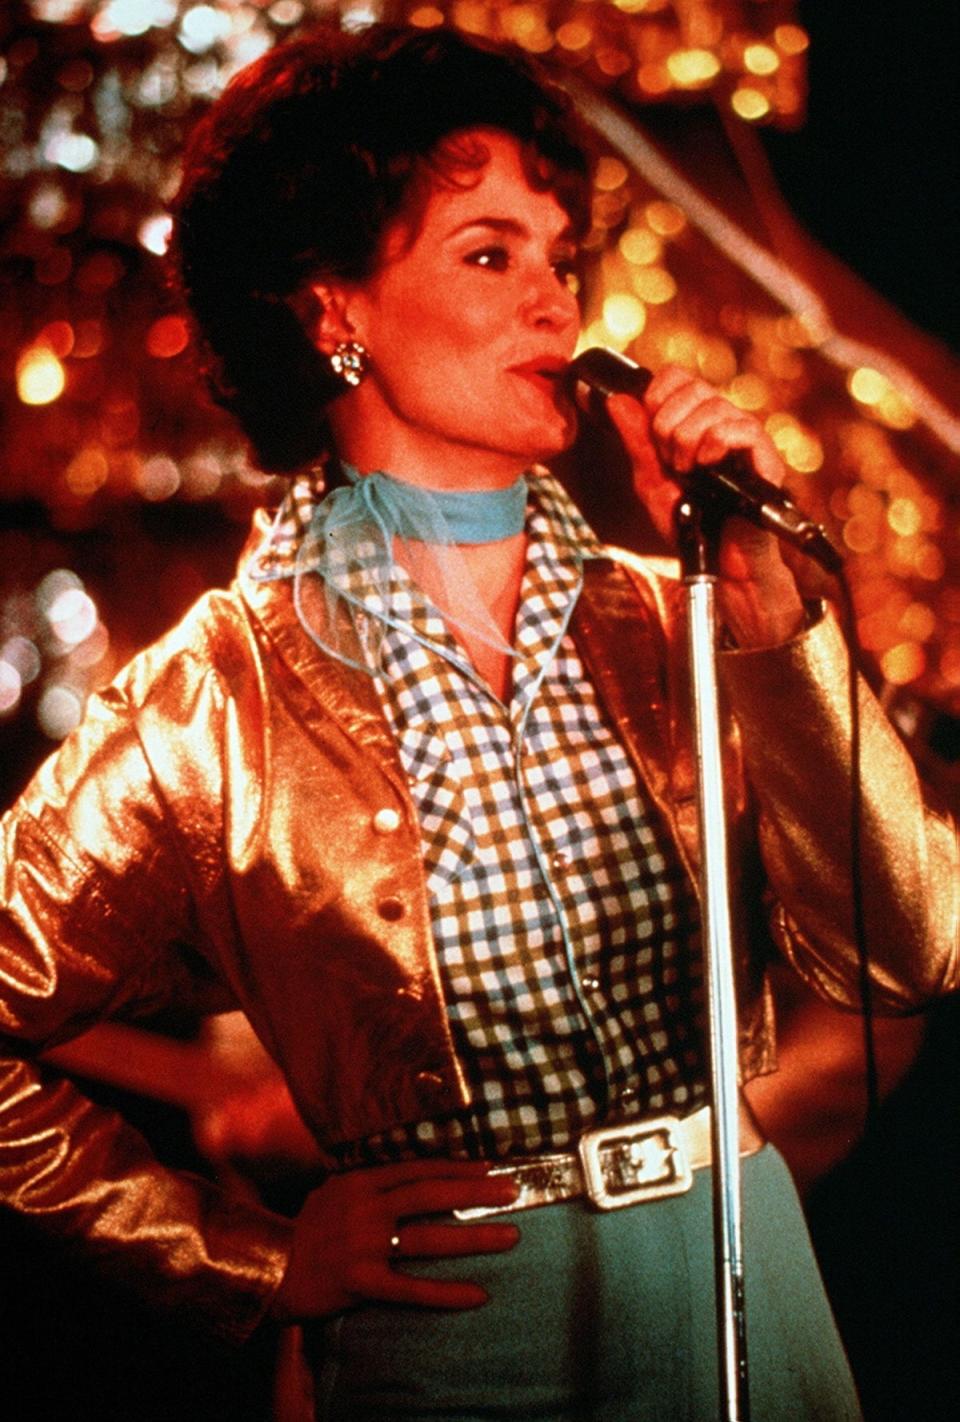 Jessica Lange won an Academy Award for her role as Patsy Cline in the 1985 film ‘Sweet Dreams’ (ITV/Shutterstock)